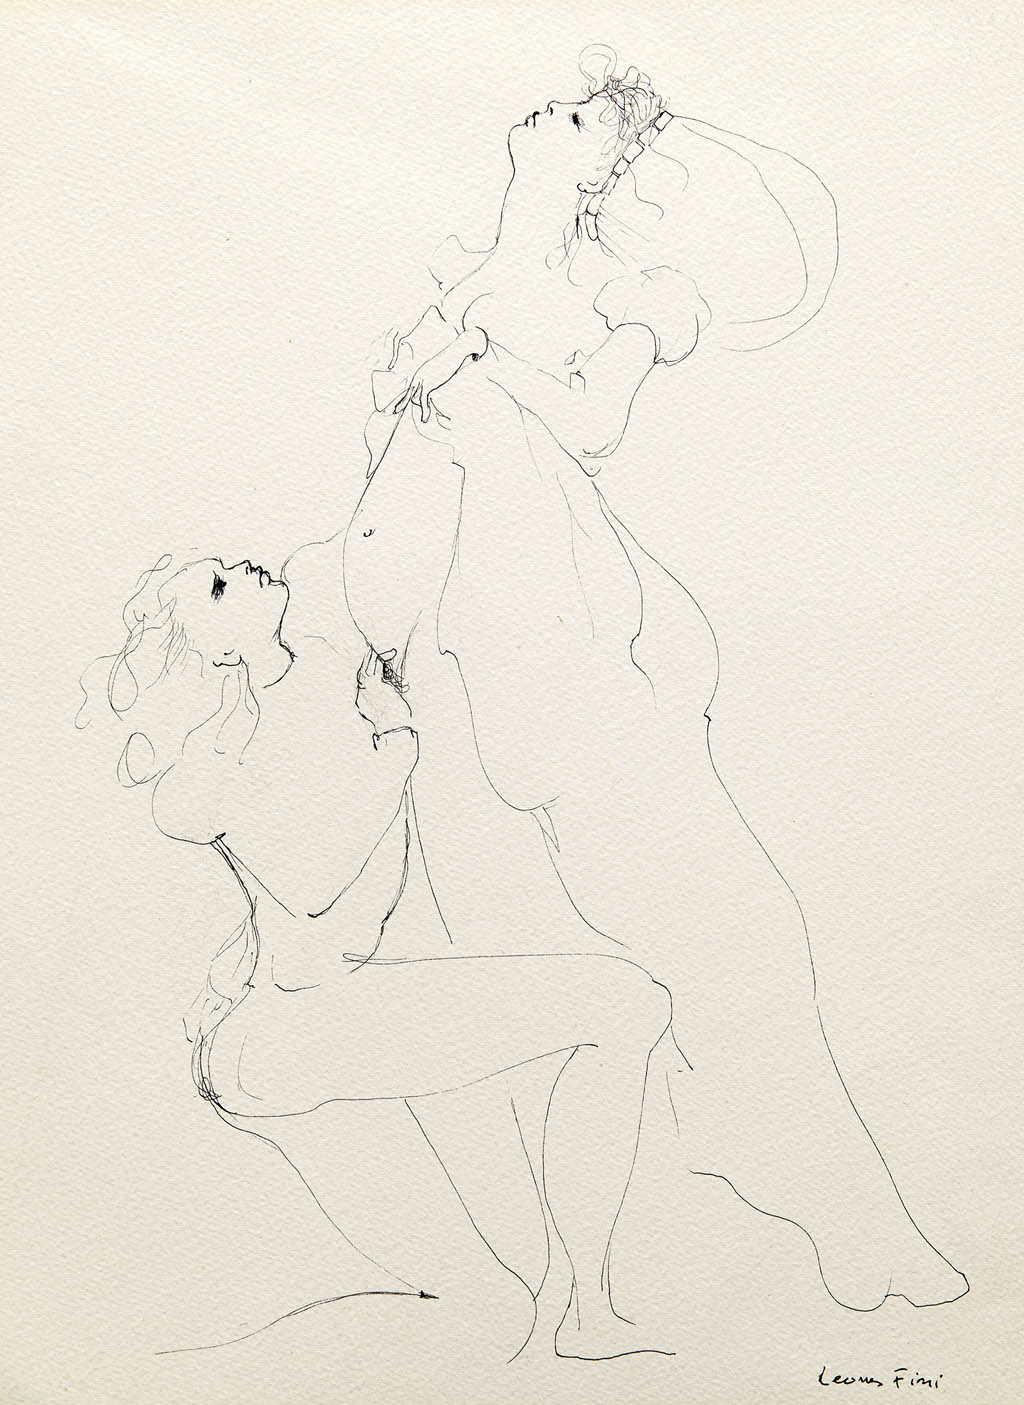 Leonor Fini - Le Concile d'Amour (The Council of Love) - 1973 ink on paper